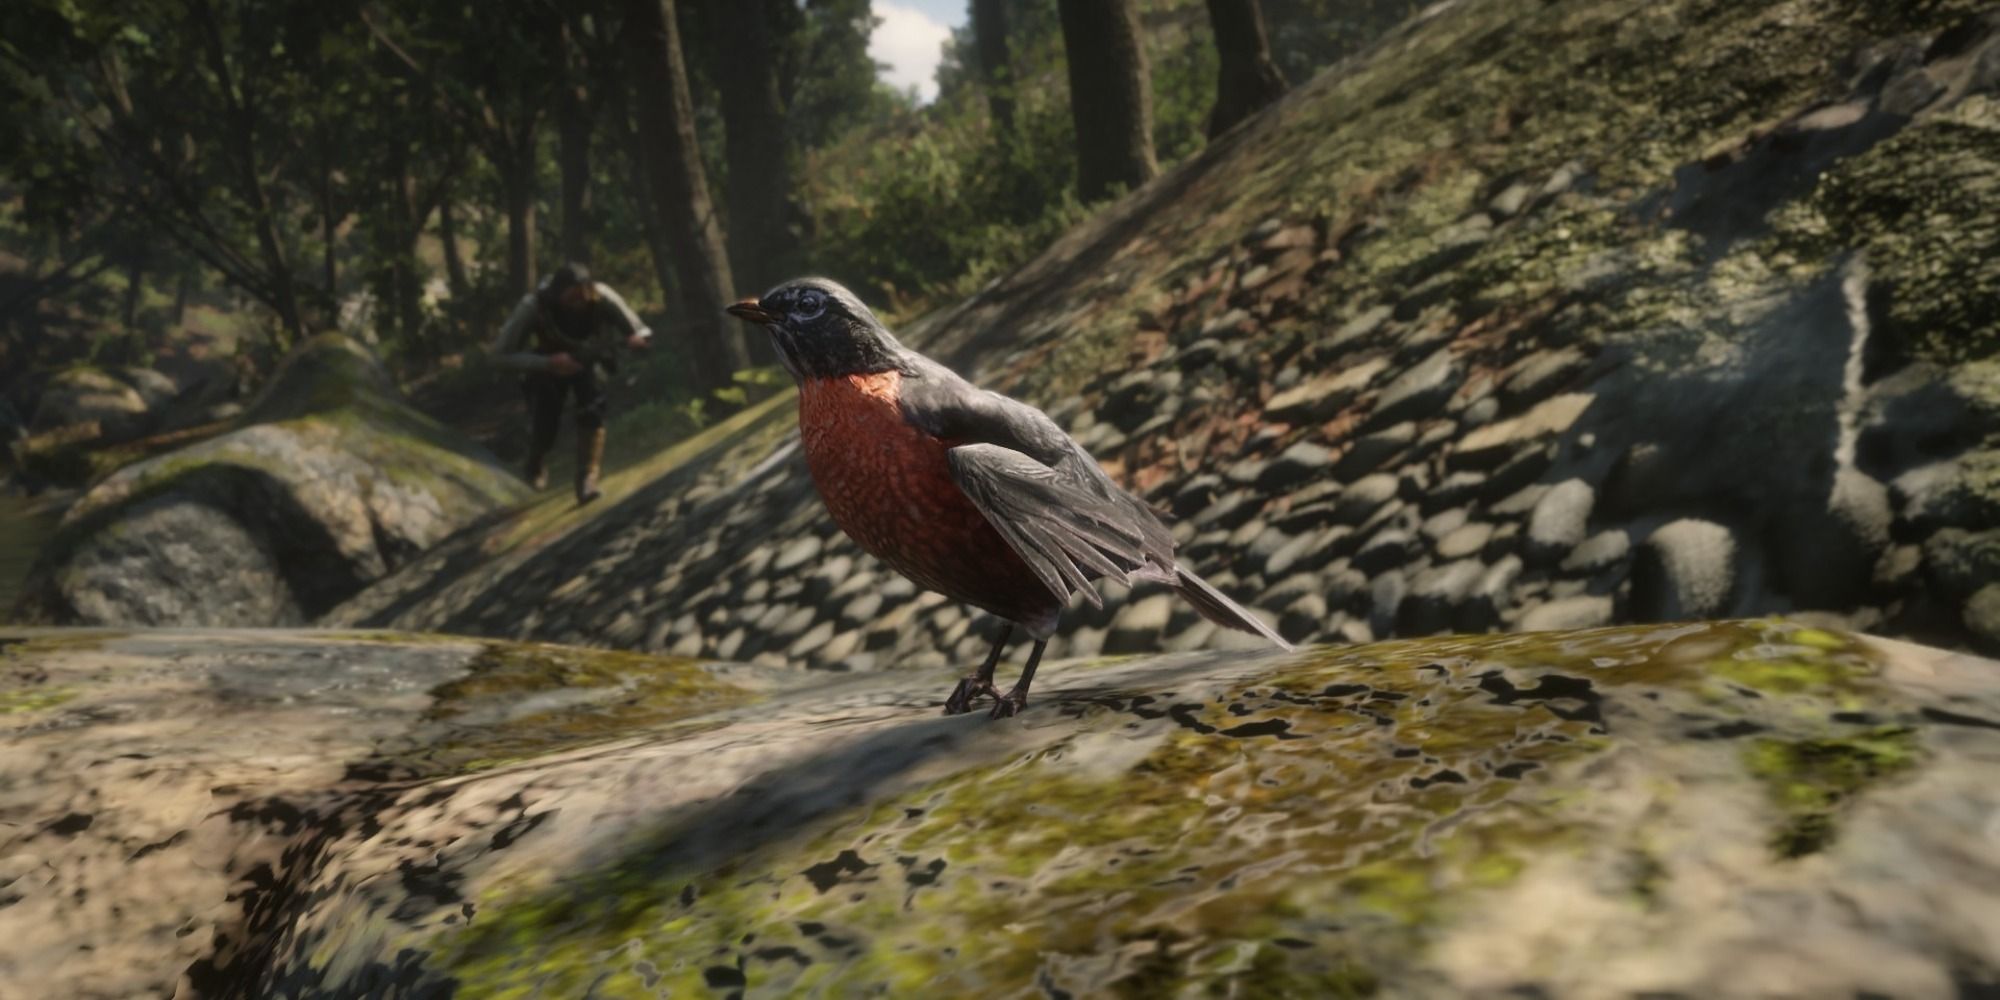 An image of the Robin from Red Dead Redemption 2, featuring the bird sitting on a rock and showing off its classic red body.